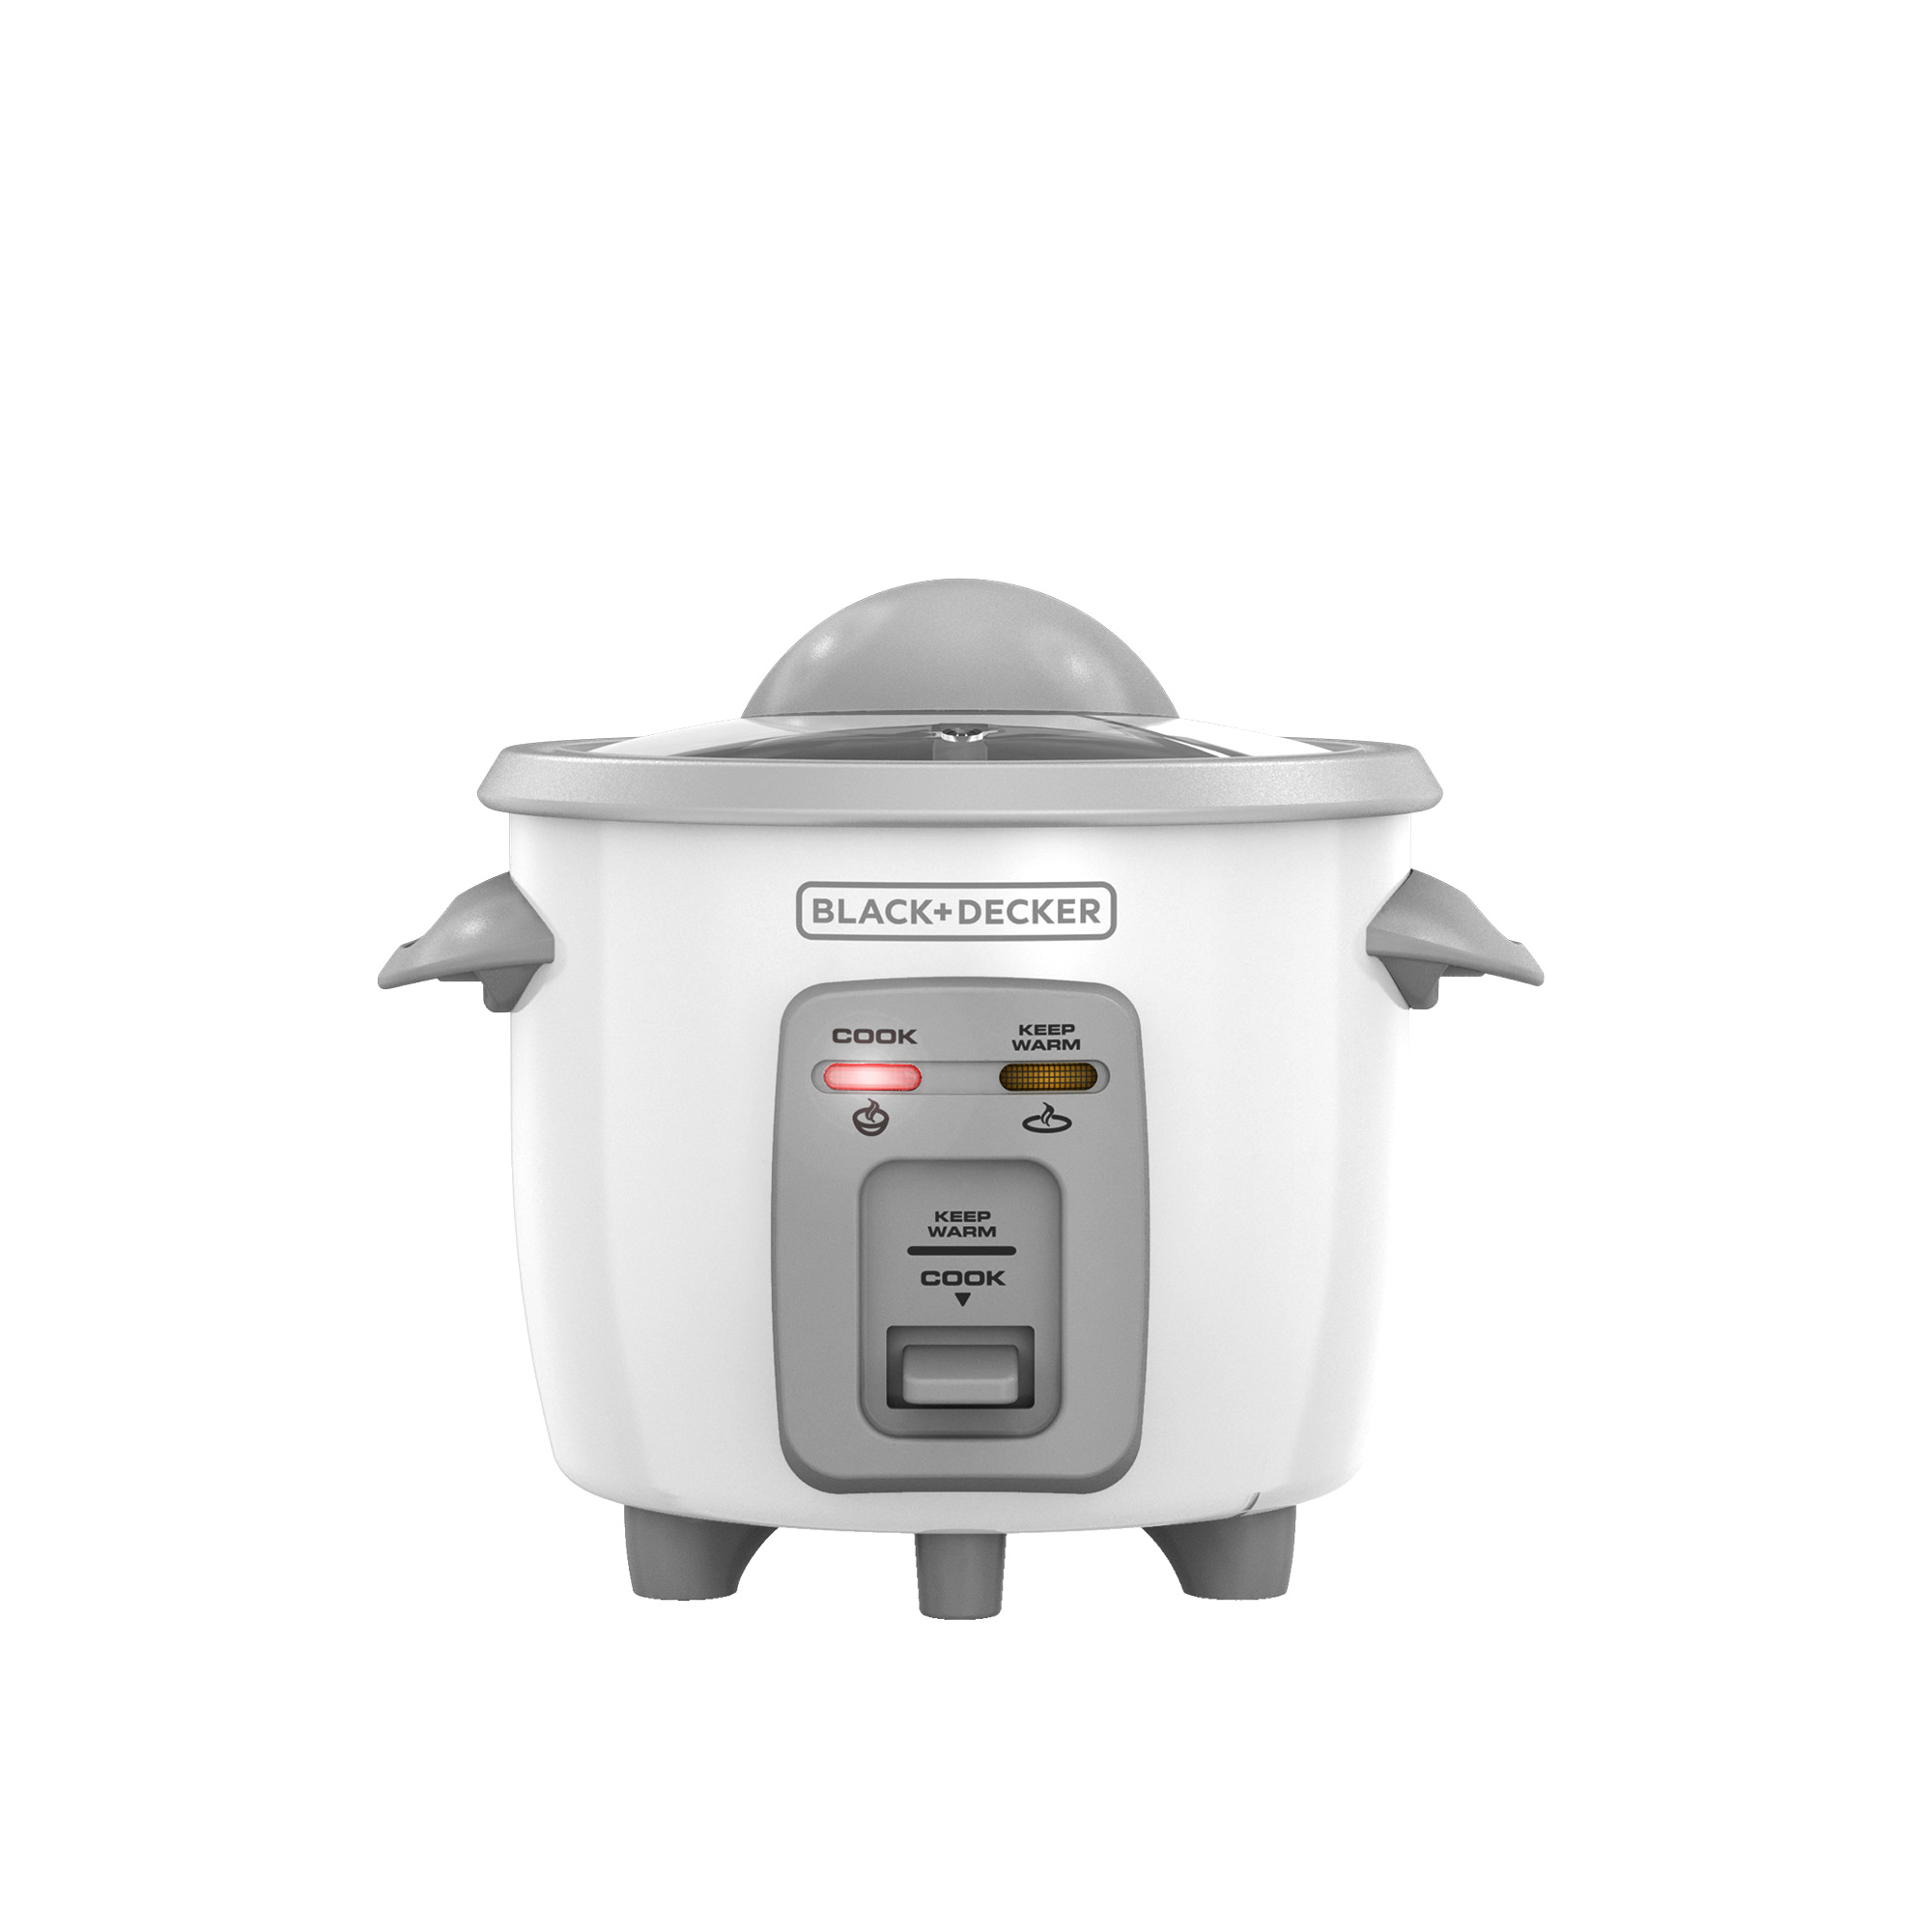 https://s7cdn.spectrumbrands.com/~/media/SmallAppliancesUS/Black%20and%20Decker/Product%20Page/cooking%20appliances/rice%20cookers%20and%20steamers/RC3303/RC3303Prd2_HR.jpg?h=2000&la=en&w=2000